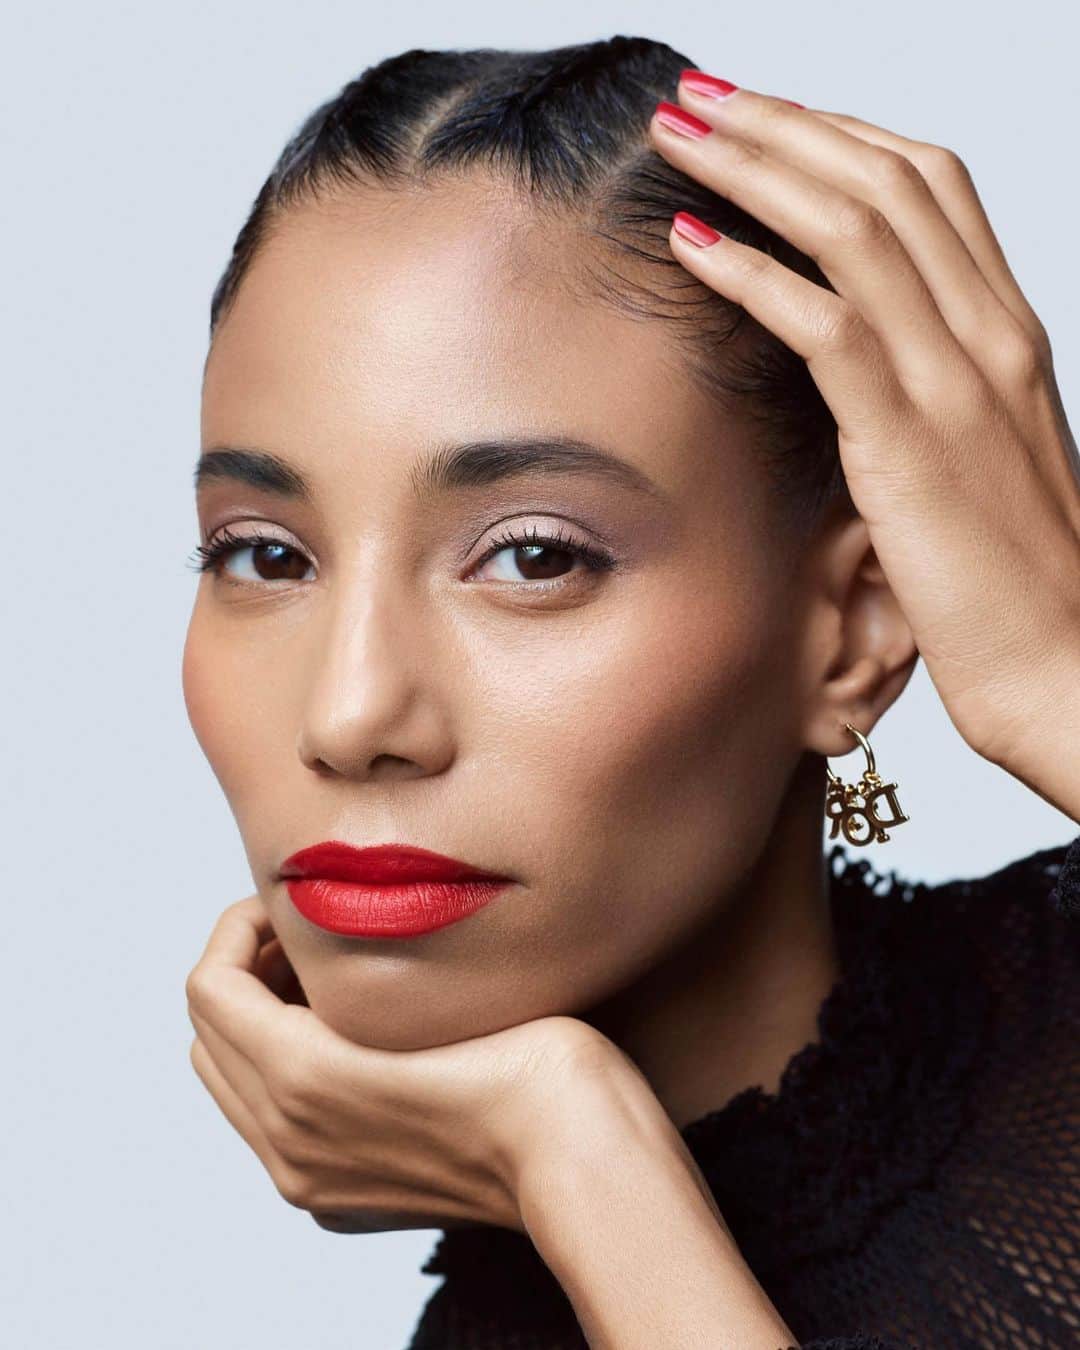 Dior Makeupのインスタグラム：「WE WEAR ROUGE FOR EMPOWERMENT @hajibafahmy is wearing Rouge Dior 999 Velvet. Shot by @josephmolines Makeup by @peterphilipsmakeup Hair by @josephpujalte Nails by @elsadeslandes • CAPTURE TOTALE SUPER POTENT SERUM DIOR FOREVER 3W & 4W DIOR FOREVER SKIN CORRECT 3W DIORSHOW BROW STYLER 004 Black DIORSHOW MAXIMIZER 3D DIORSHOW ICONIC OVERCURL 090 Black ROUGE BLUSH 614 Jungle 5 COULEURS COUTURE 599 New Look DIOR BACKSTAGE GLOW FACE PALETTE 001 Universal DIOR CONTOUR 999 ROUGE DIOR 999 Velvet DIOR VERNIS 999 • #diormakeup #rougedior #wewearrouge」